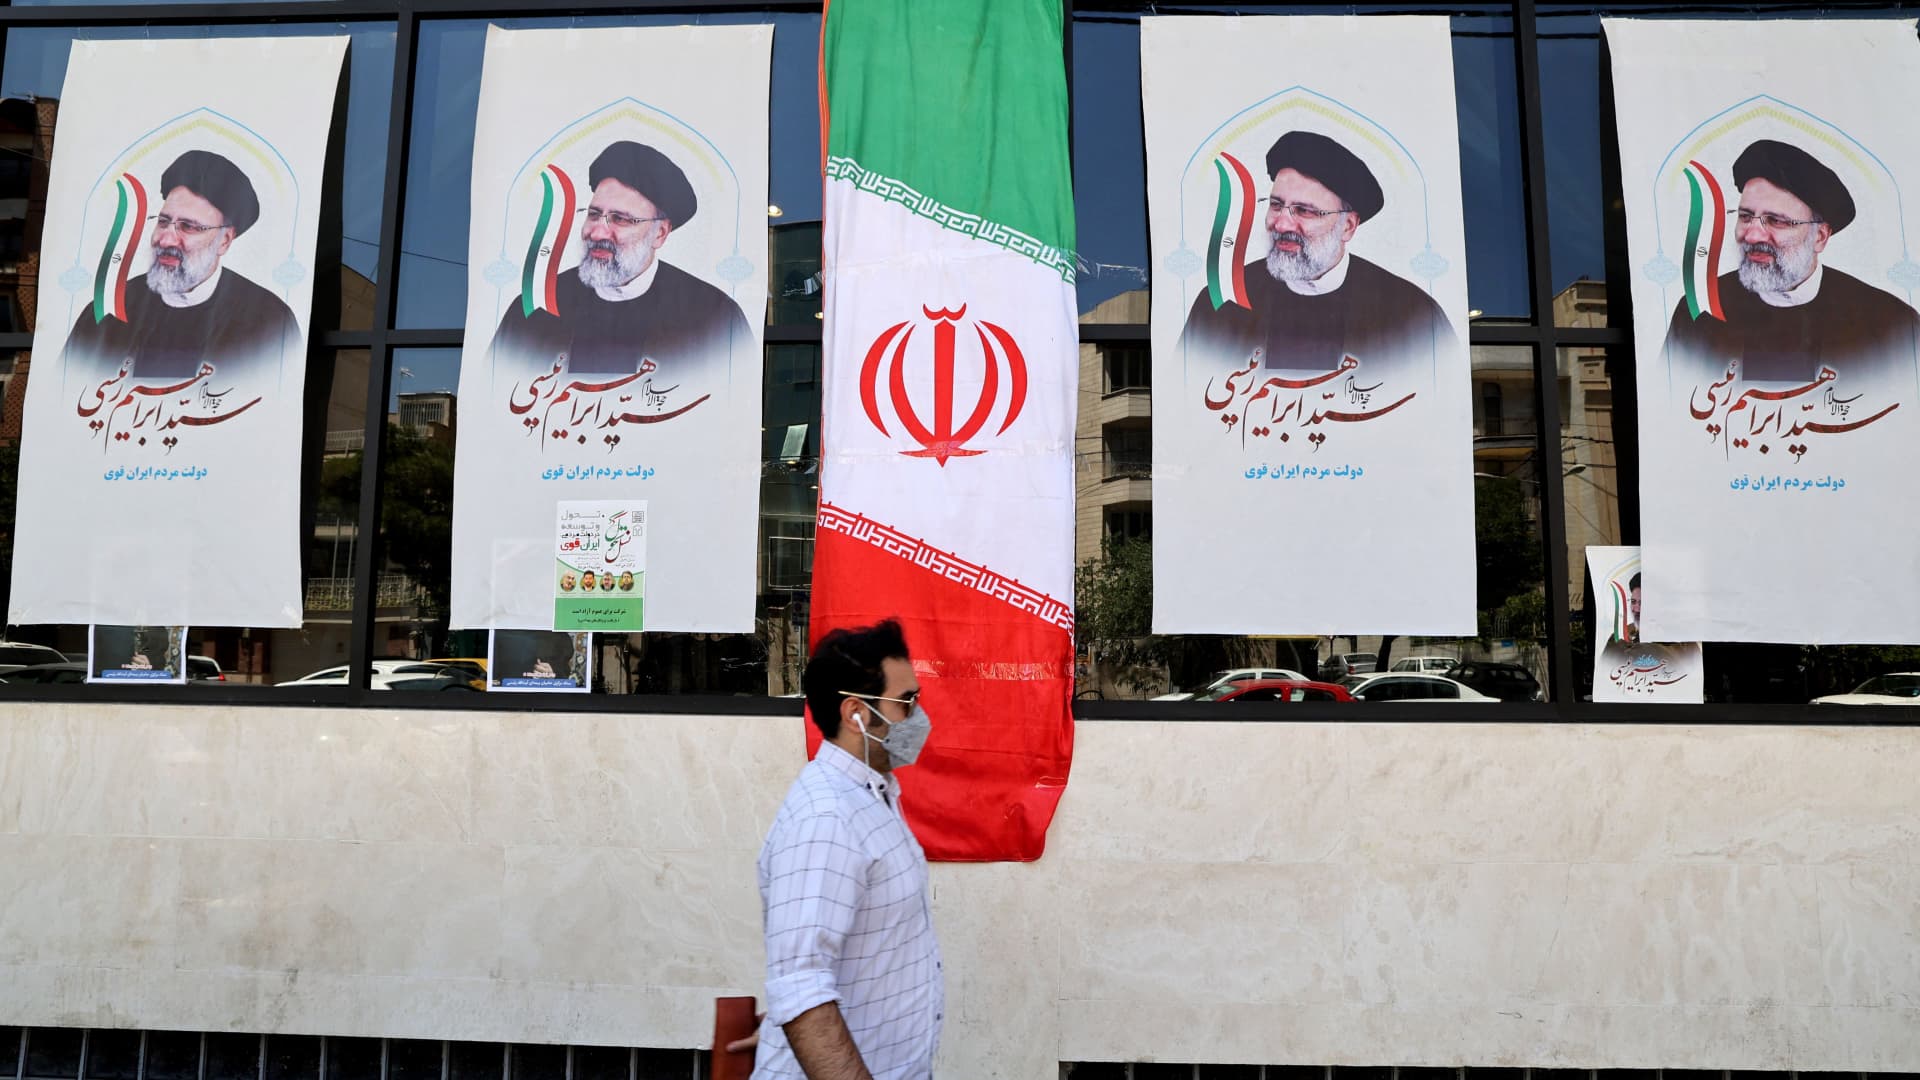 Iran-China ties could strengthen if sanctions lift, analyst says